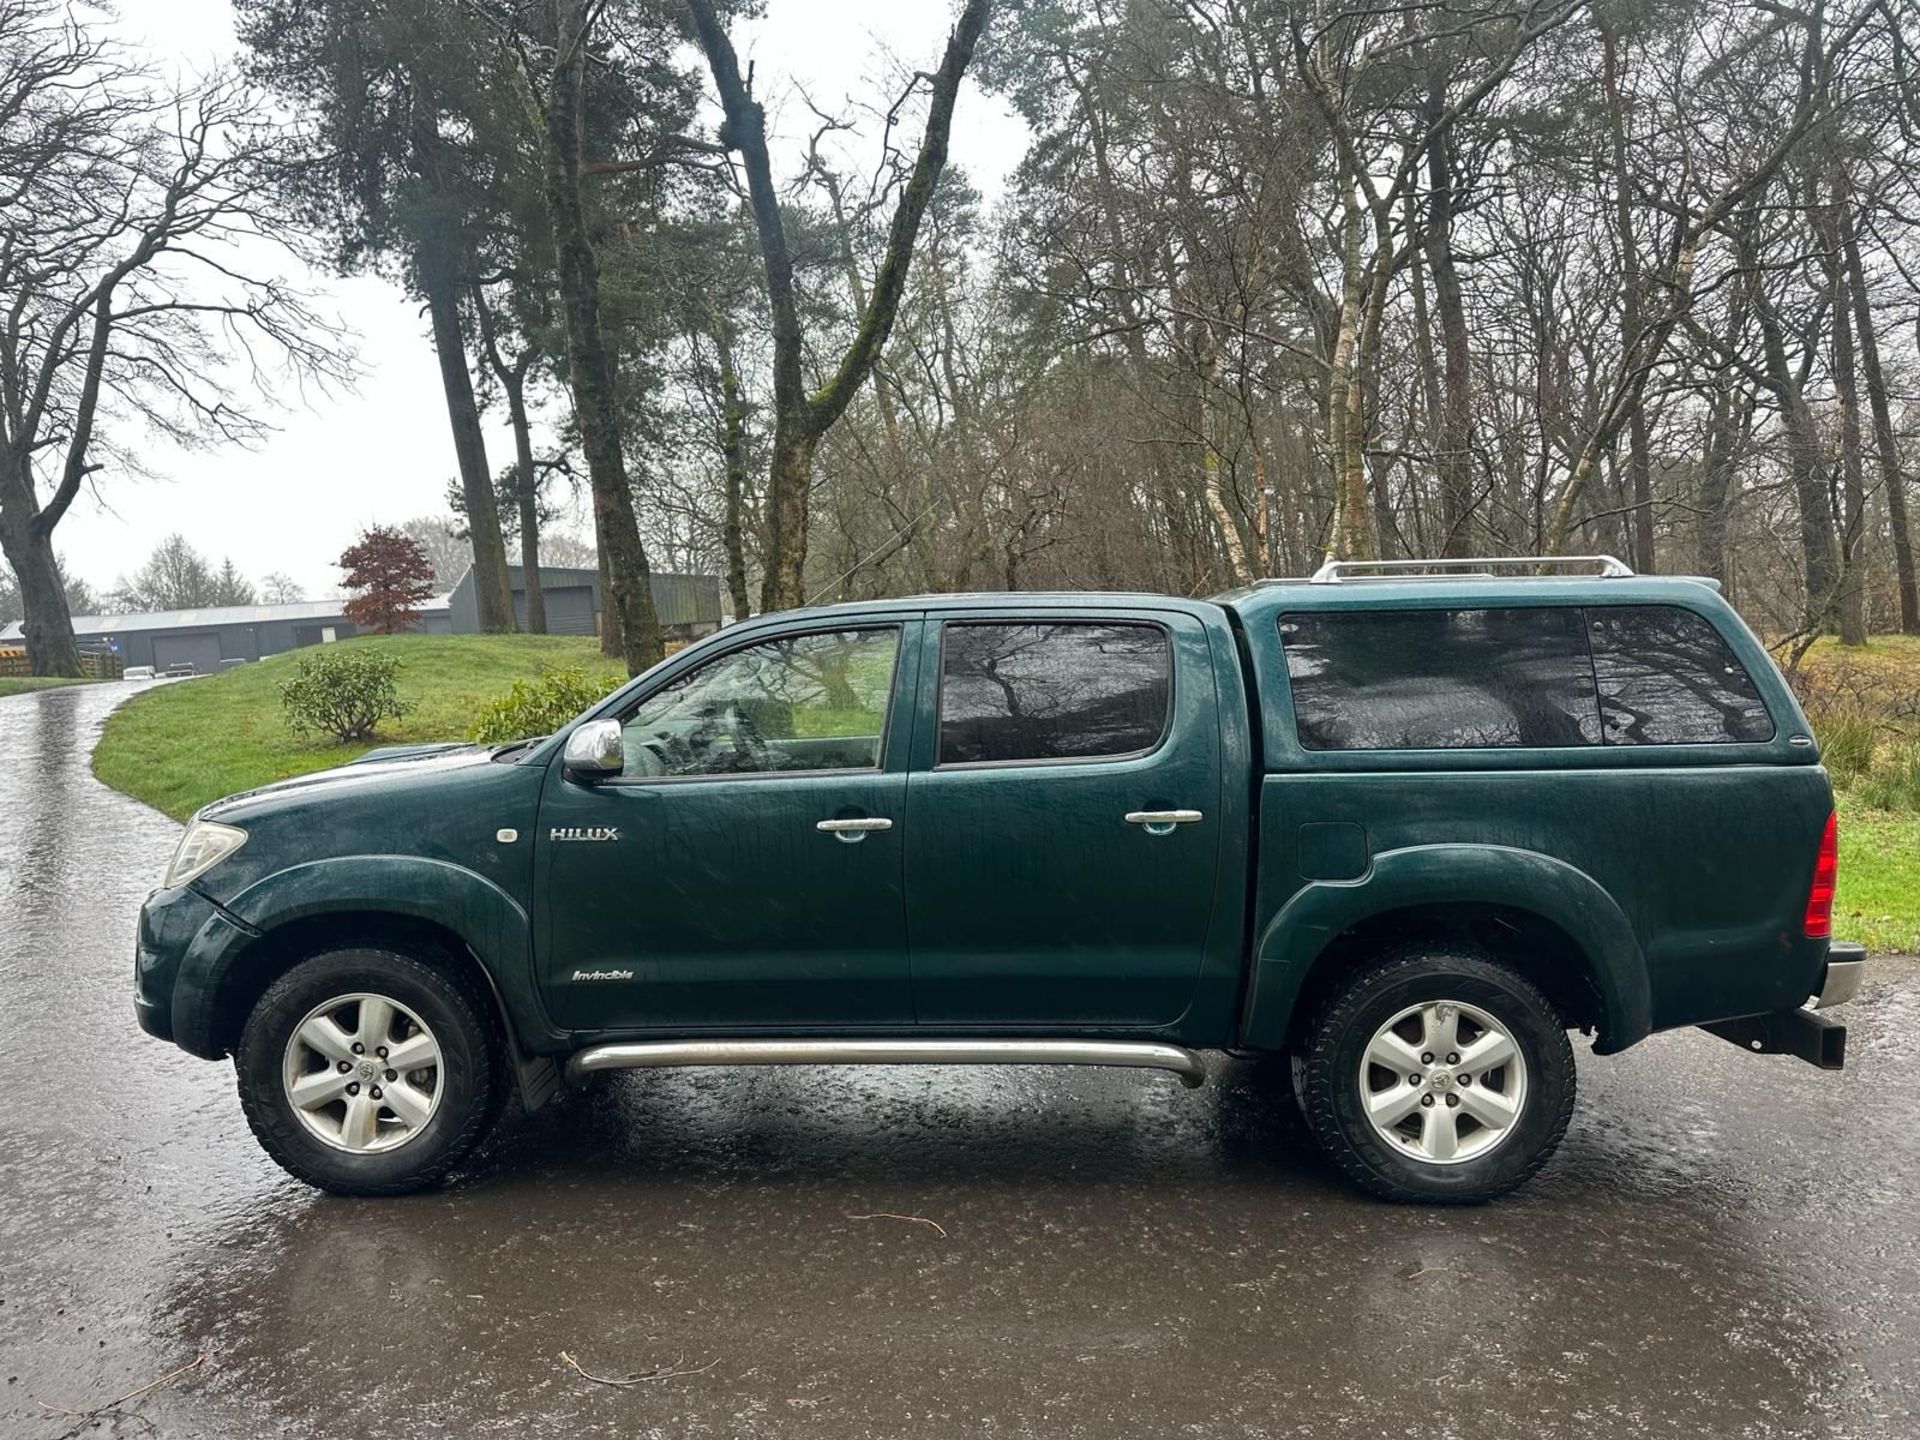 TOYOTA HILUX 3.0 INVINCIBLE DOUBLE CAB PICKUP TRUCK - Image 2 of 11